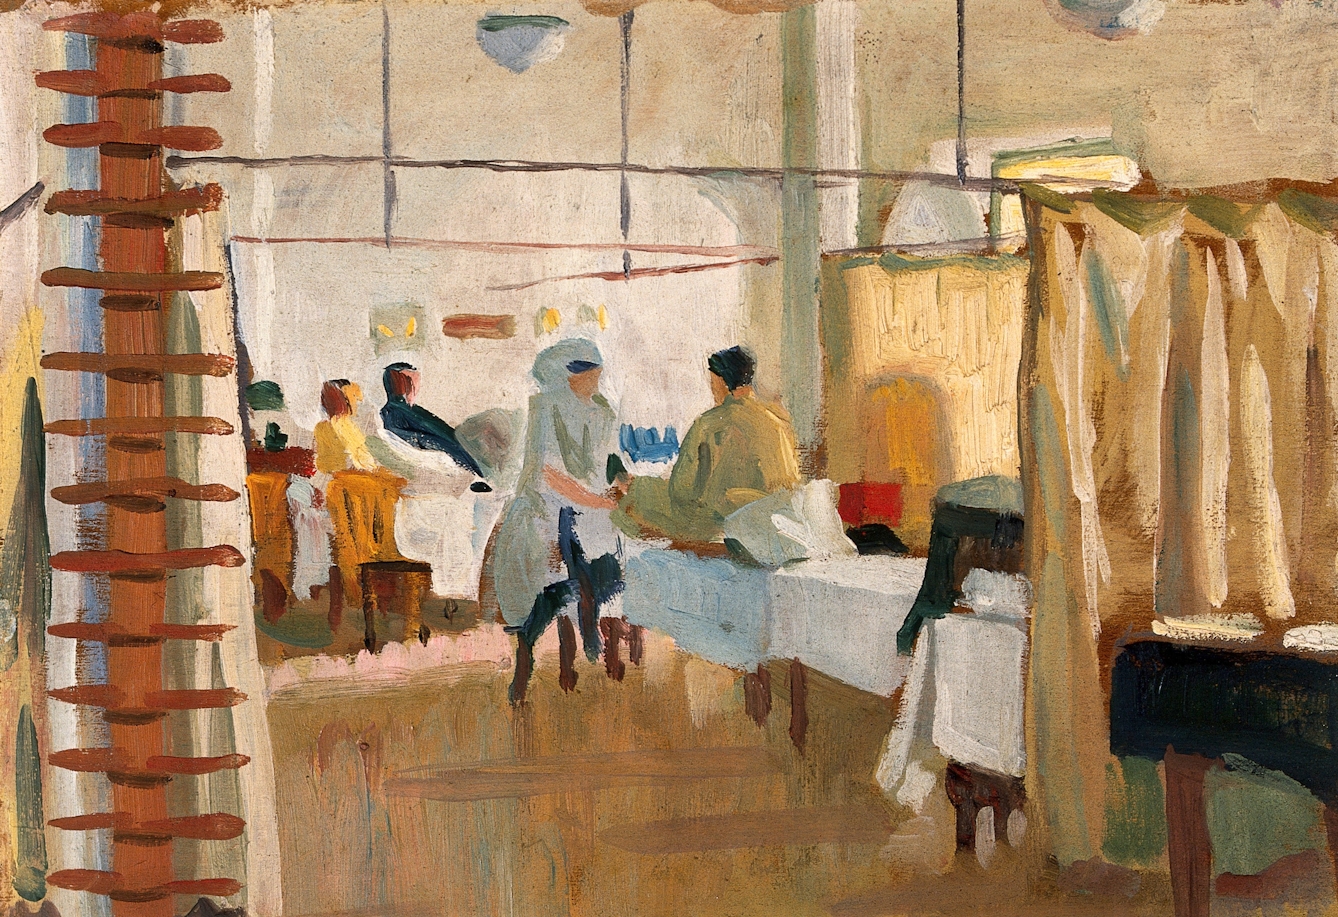 Oil painting depicting a warm scene in the massage room of a military hospital where a man sitting on a bed in his pyjamas is receiving a foot massage from a nurse.